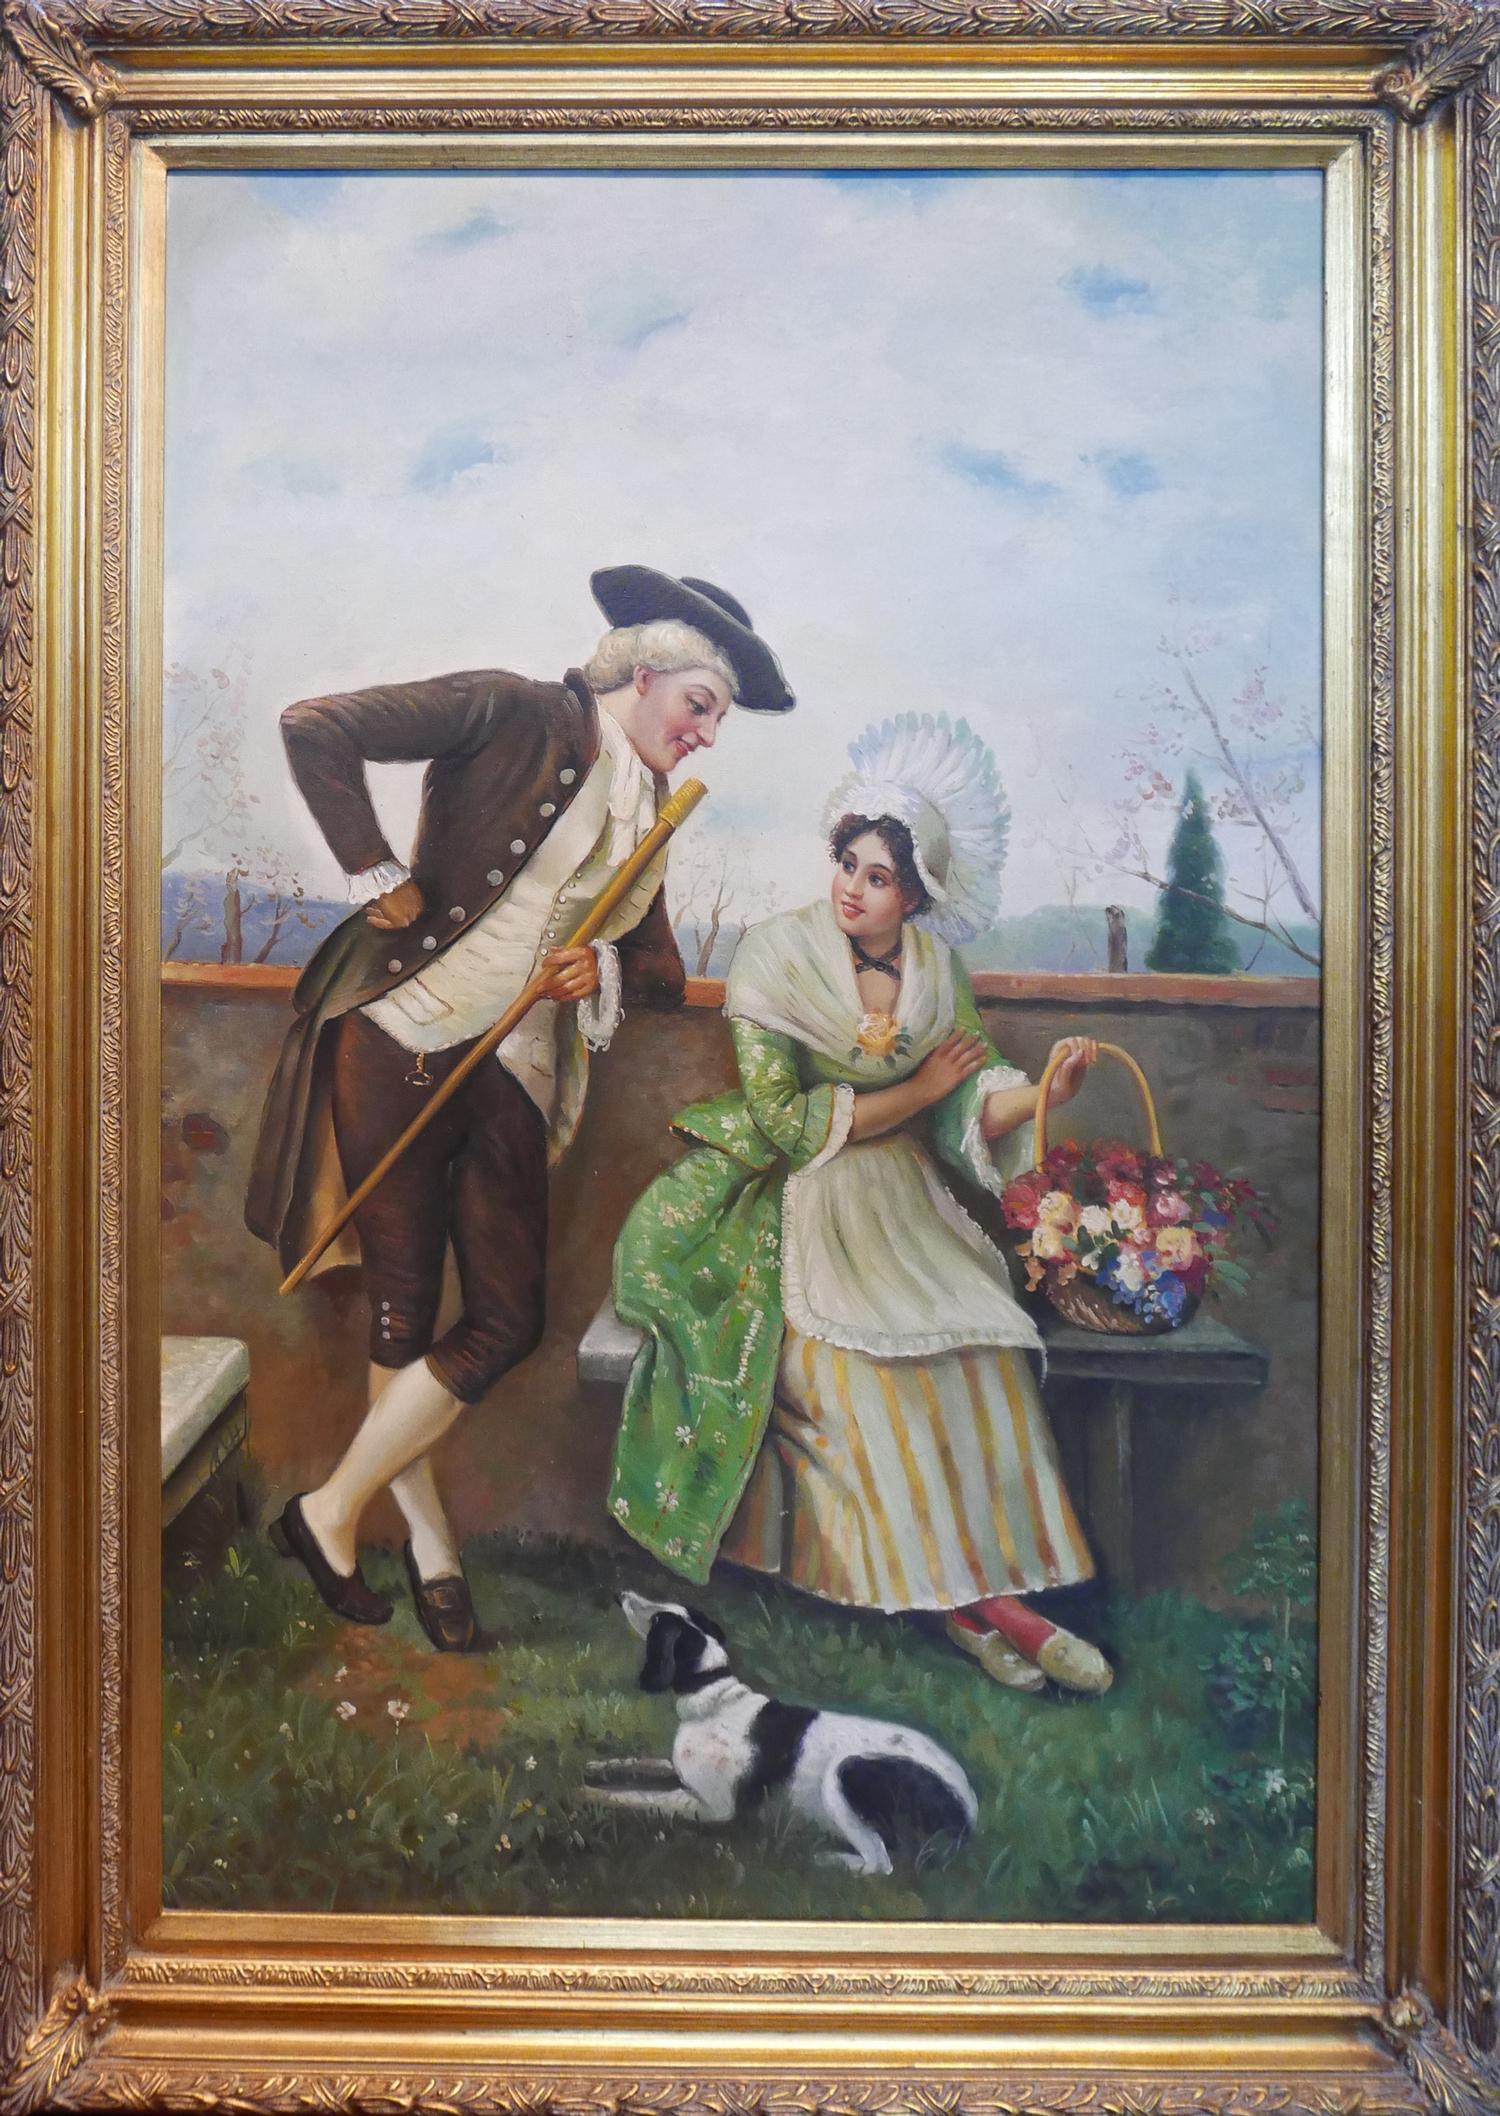 20th century school, An 19th century style couple with a dog in a garden setting, oil on canvas,